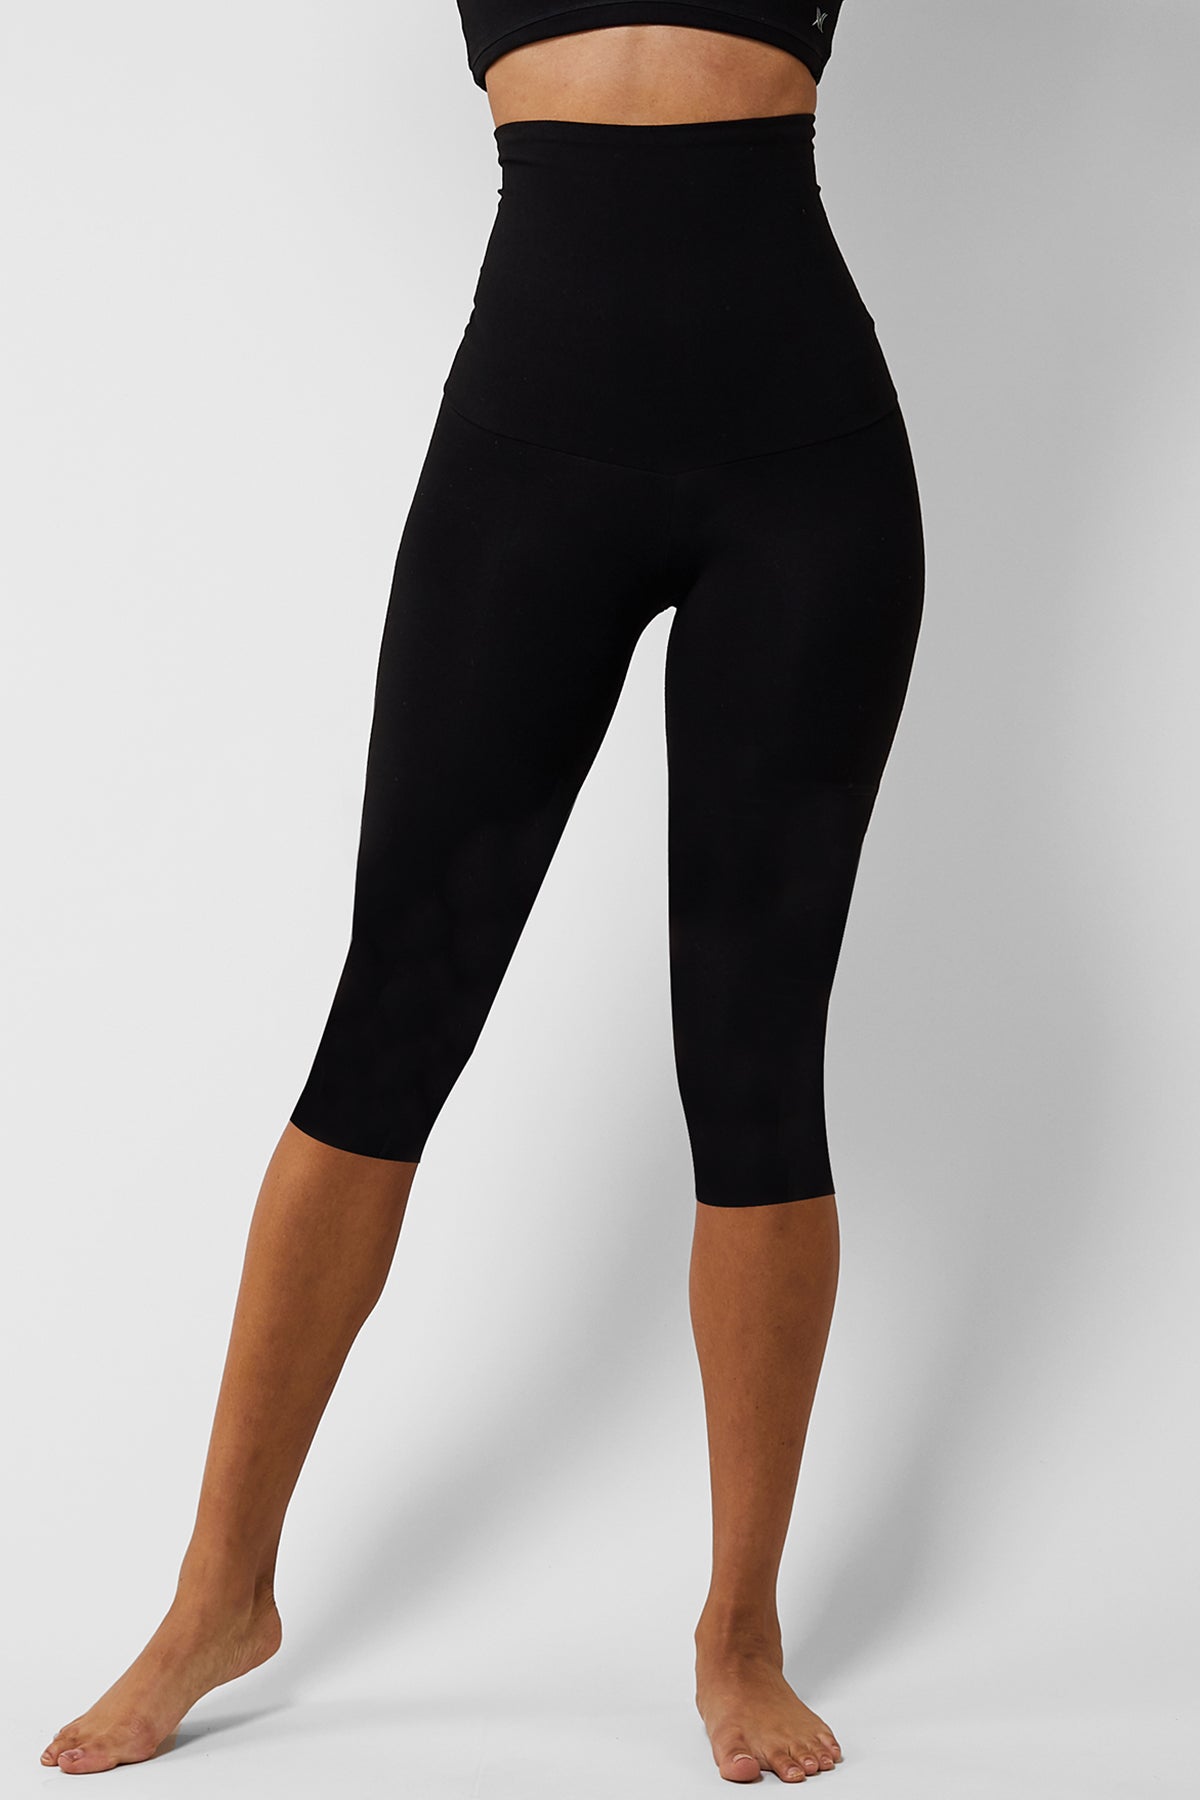 High Waisted Tummy Control High Compression Yoga Capri Leggings From Babes  & Barbells Fitness